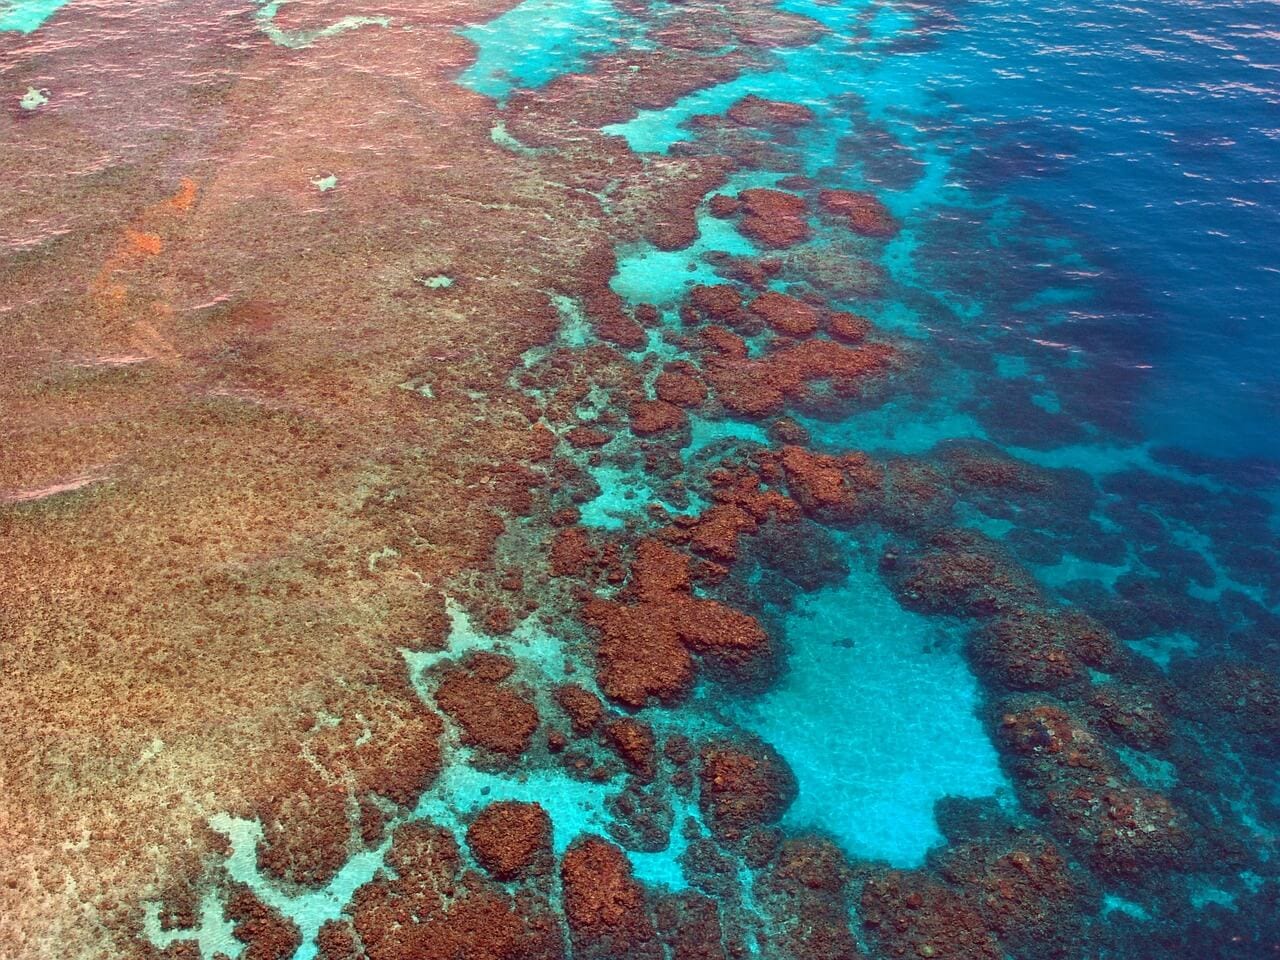 https://pixabay.com/photos/great-barrier-reef-diving-coral-261726/